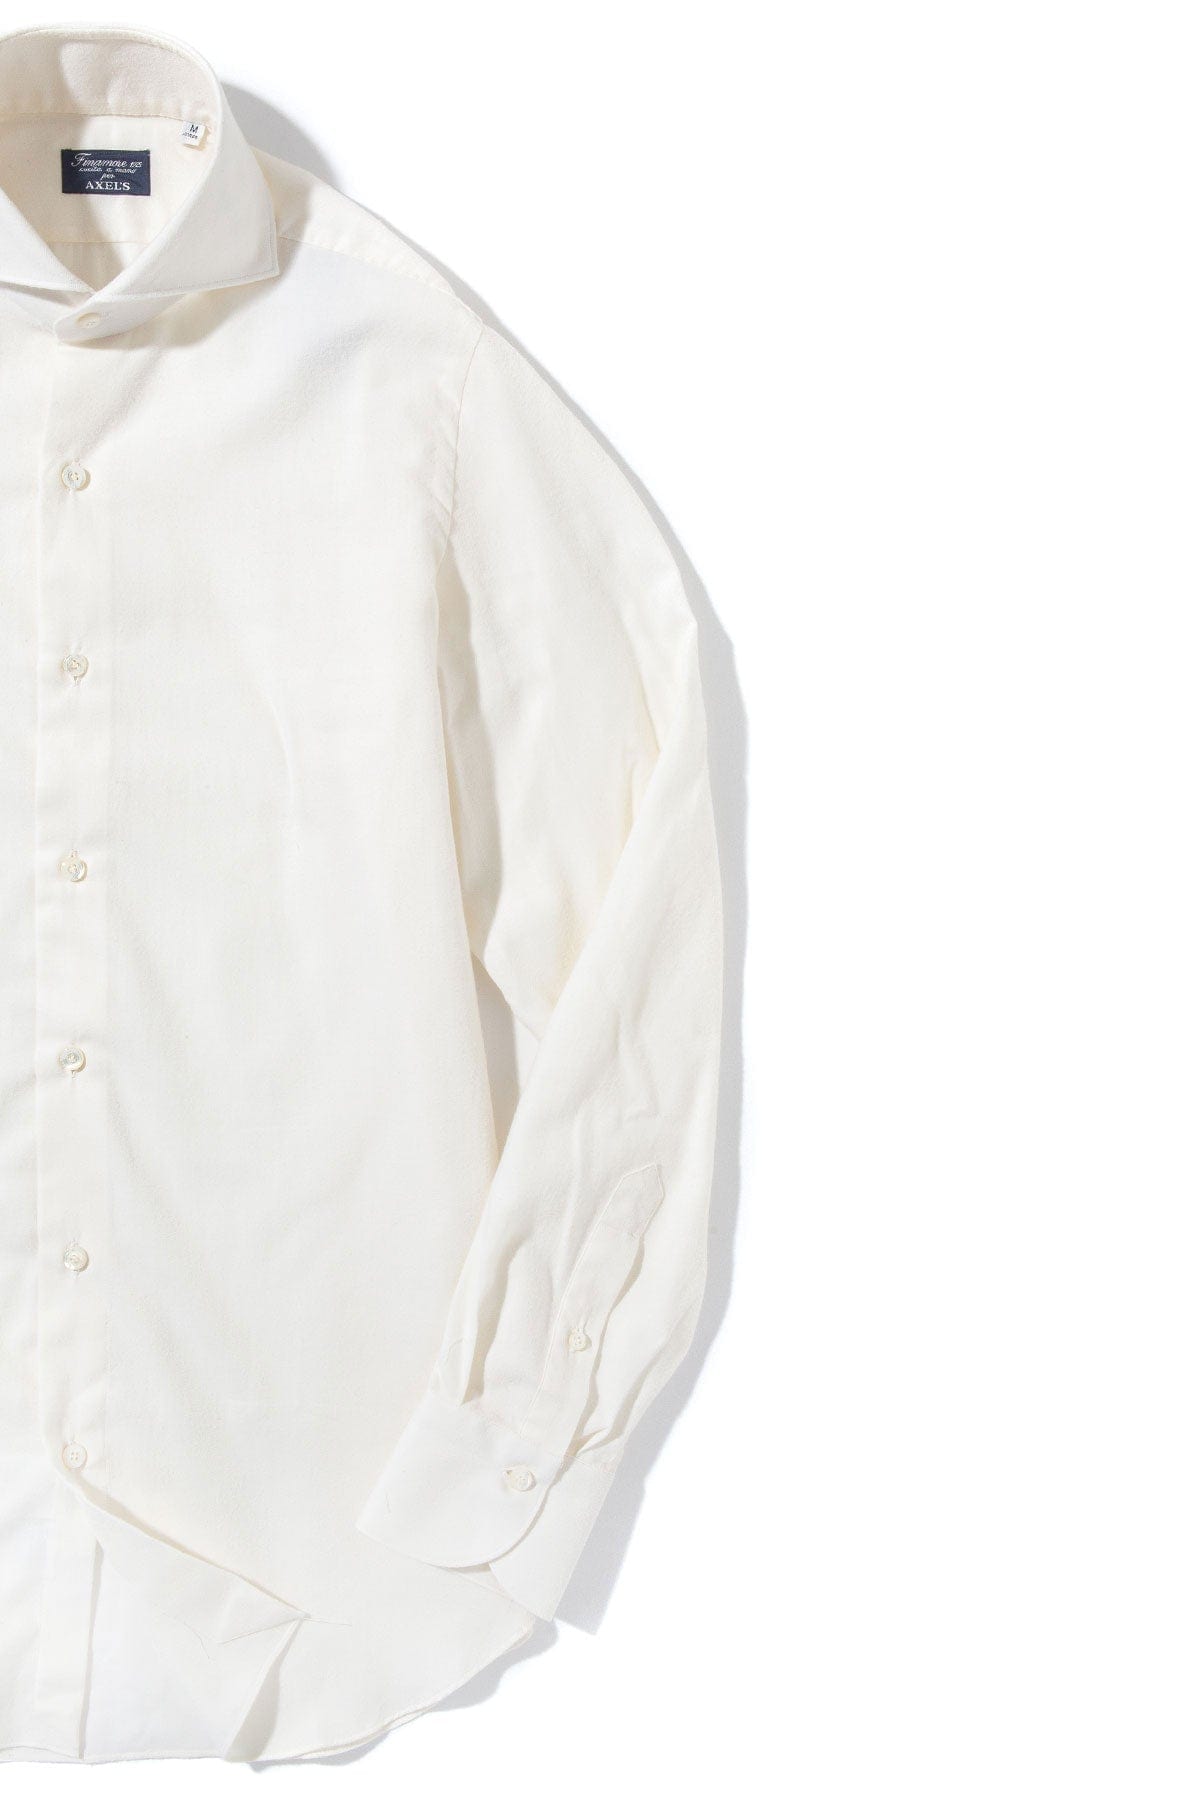 Hemme Cotton Cashmere Shirt in White - AXEL'S